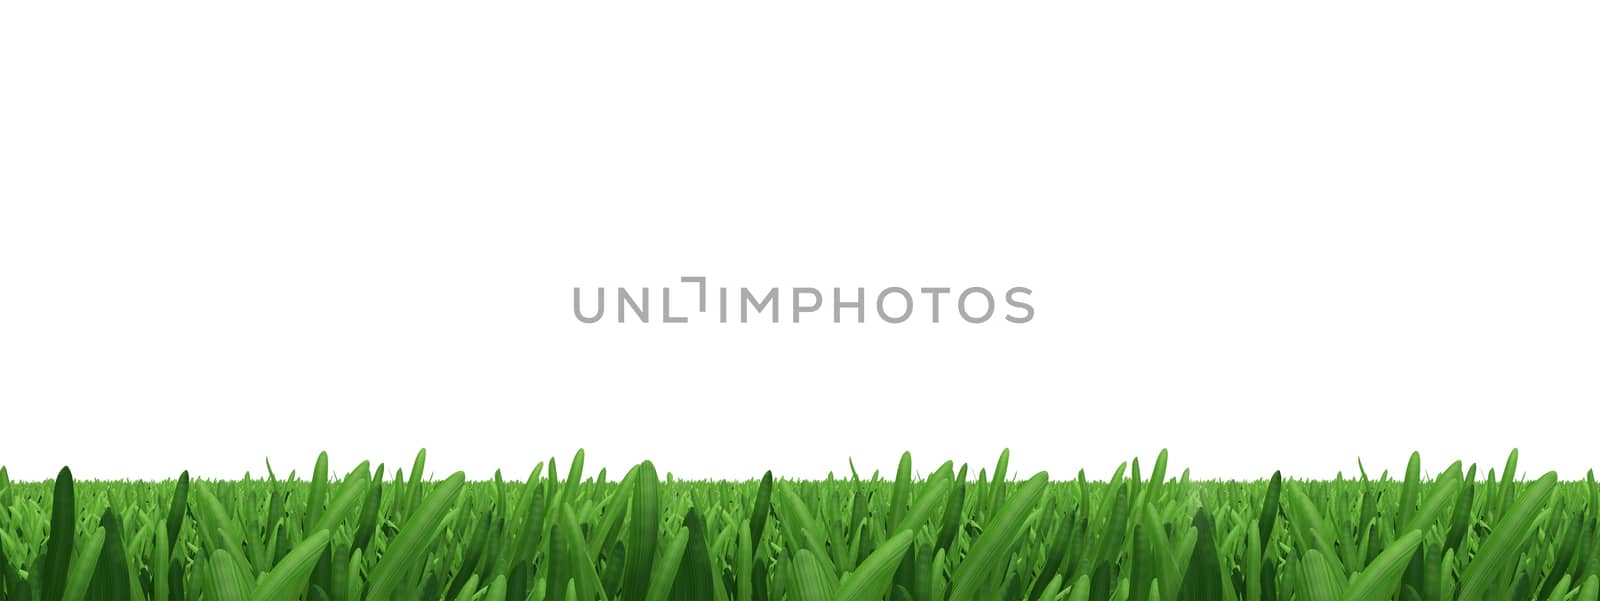 Green grass on isolated white background, close-up view